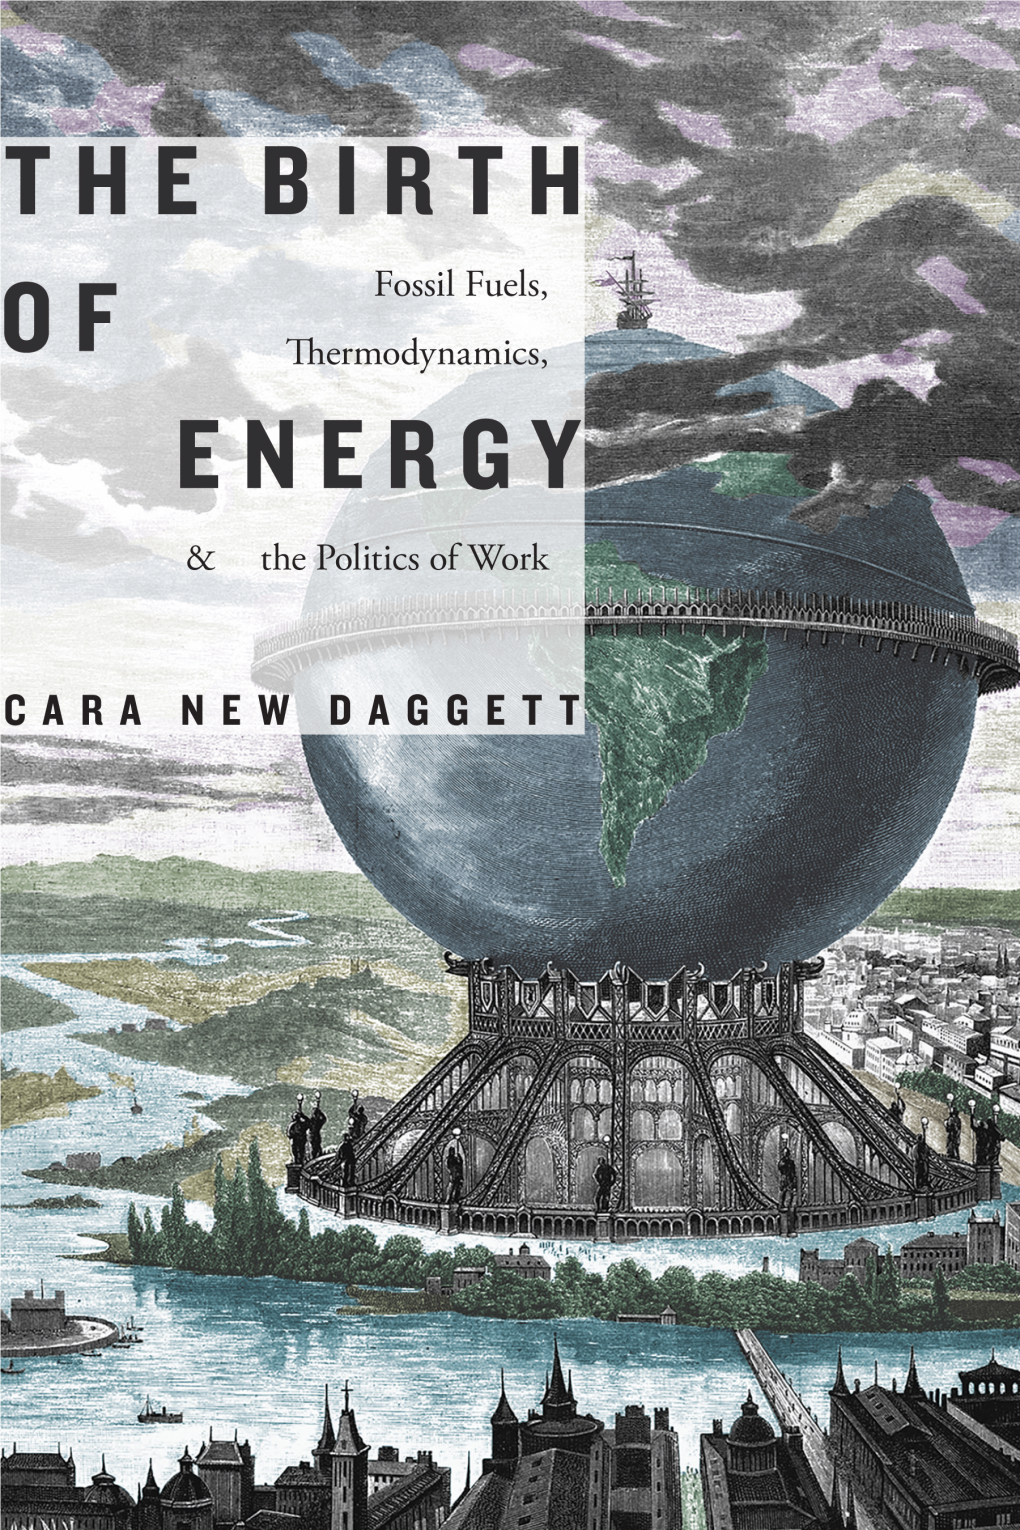 THE BIRTH of ENERGY Eles ­Ment a Series Edited by Stacy Alaimo and Nicole Starosielski the BIRTH of ENERGY